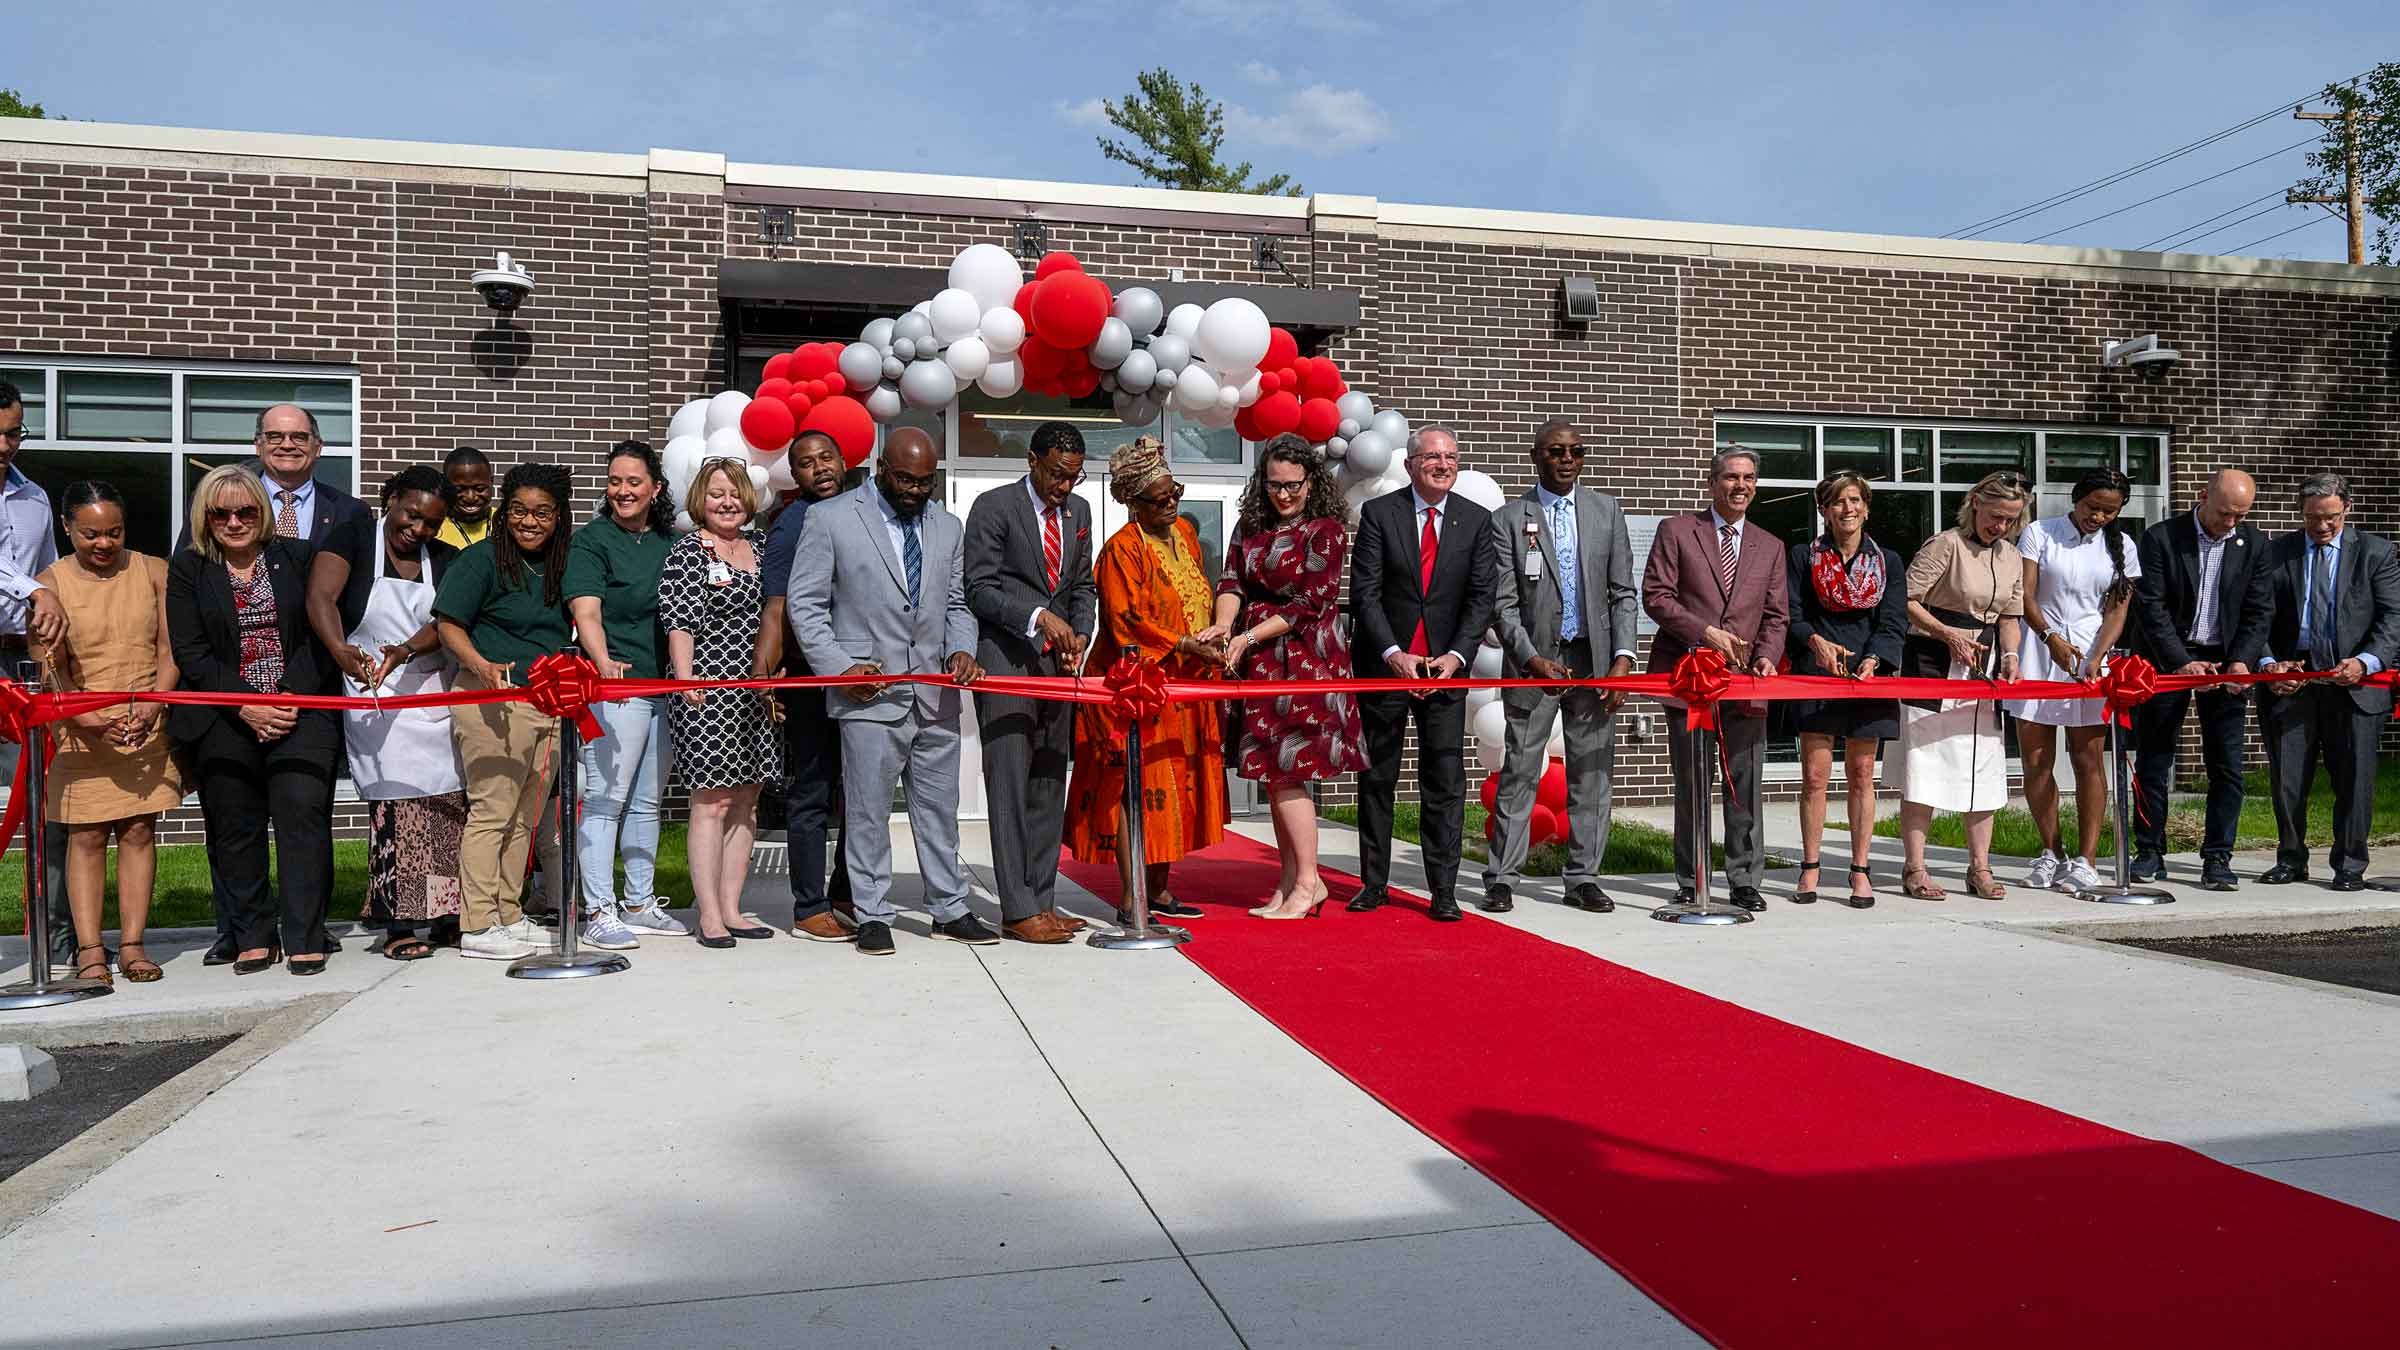 ribbon cutting at the opening of Ohio State’s Healthy Community Center